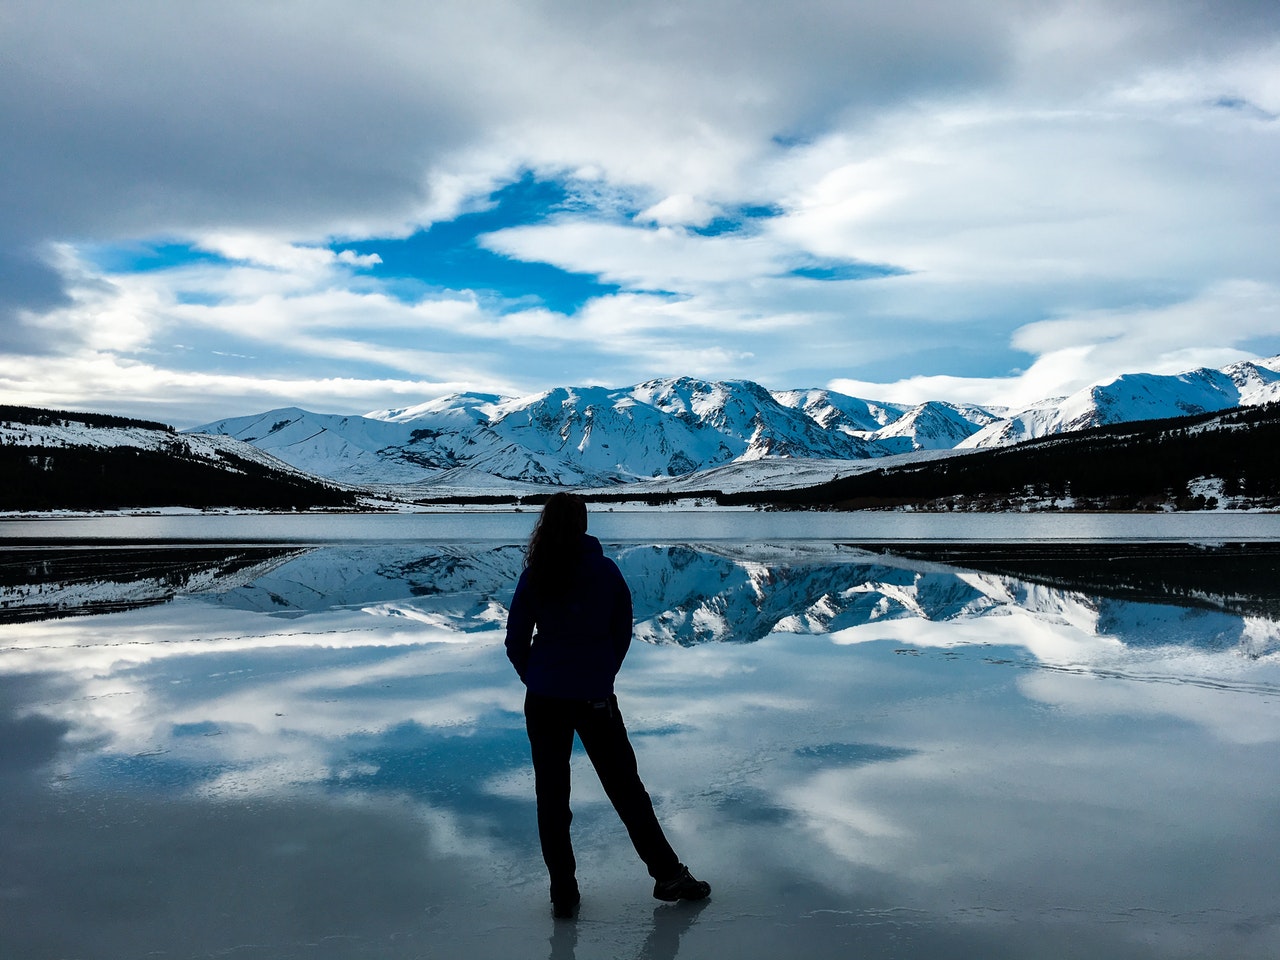 a person standing on a lake with mountains in the background